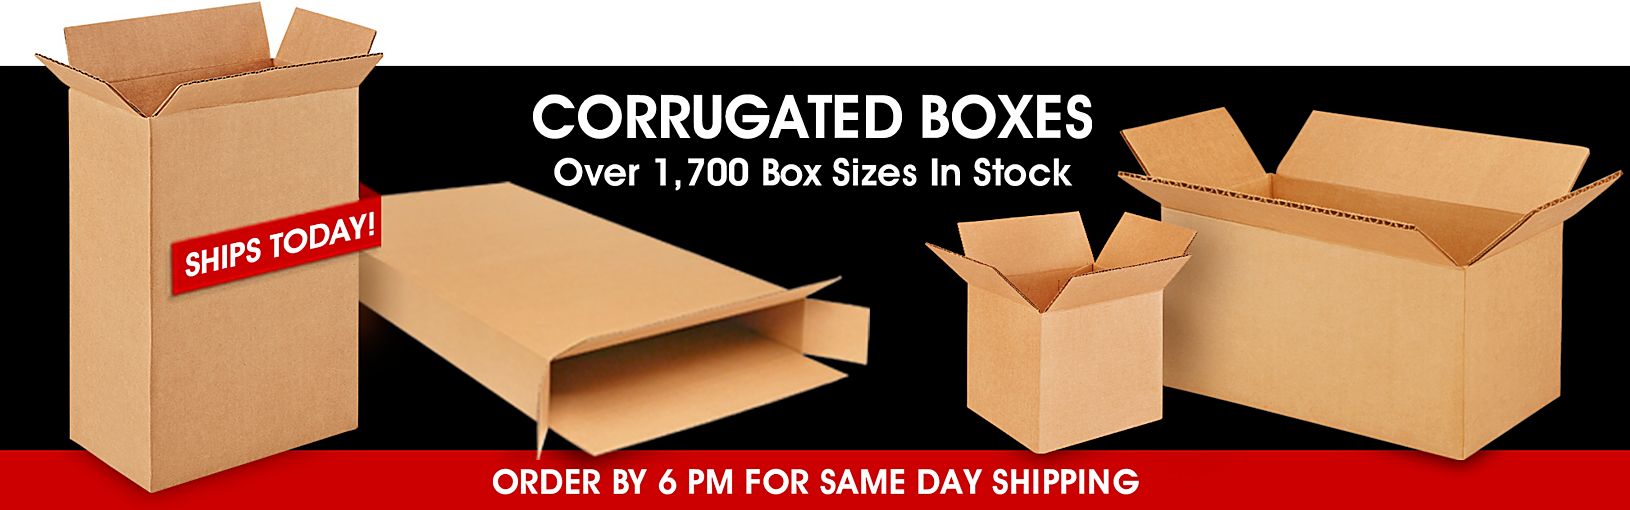 Corrugated Boxes - Over 1,650 Box Sizes in Stock. Order by 6 PM For Same Day Shipping.